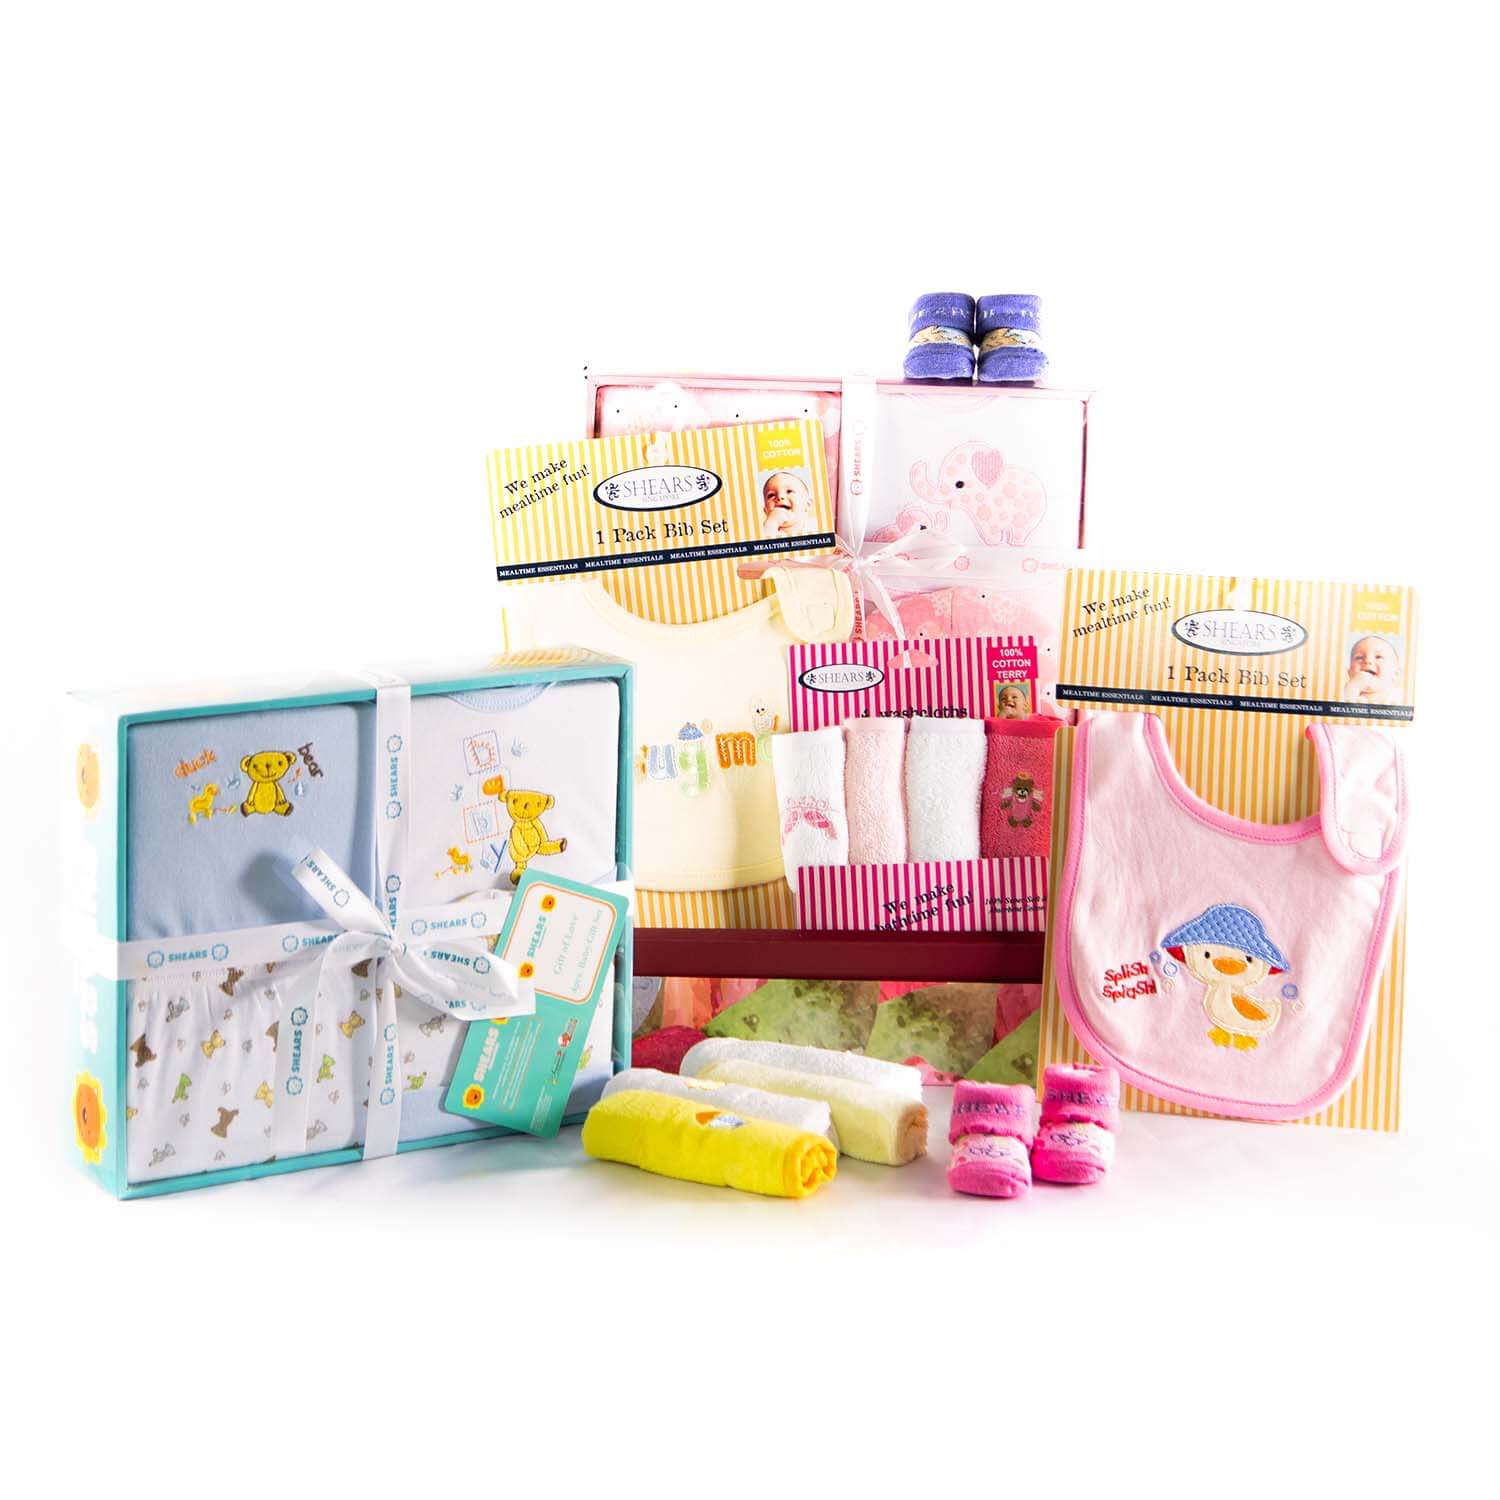 Our Top 3 Picks for the Best Baby Gift Hampers